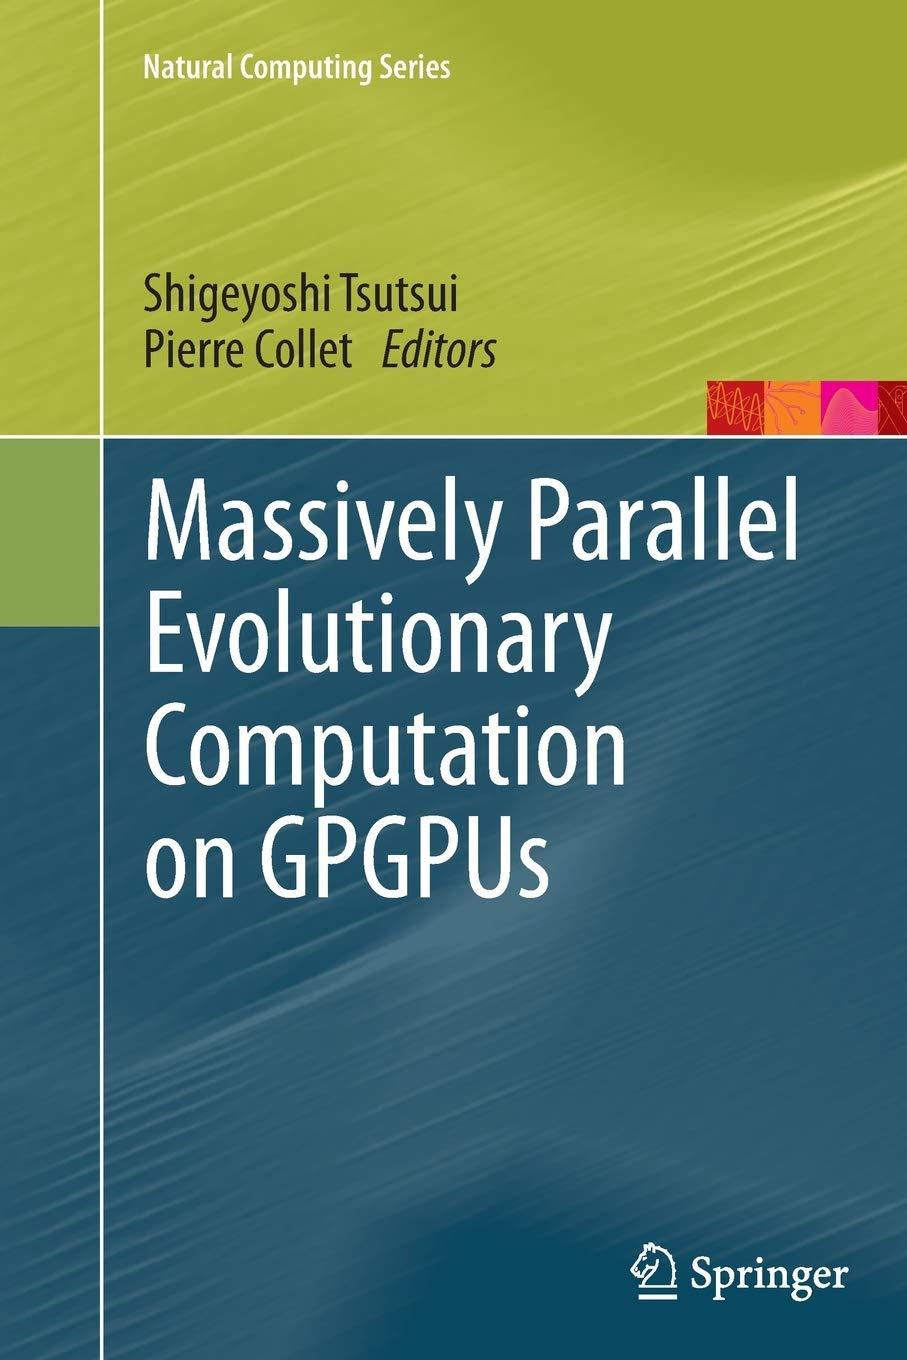 massively parallel evolutionary computation on gpgpus 1st edition shigeyoshi tsutsui, pierre collet